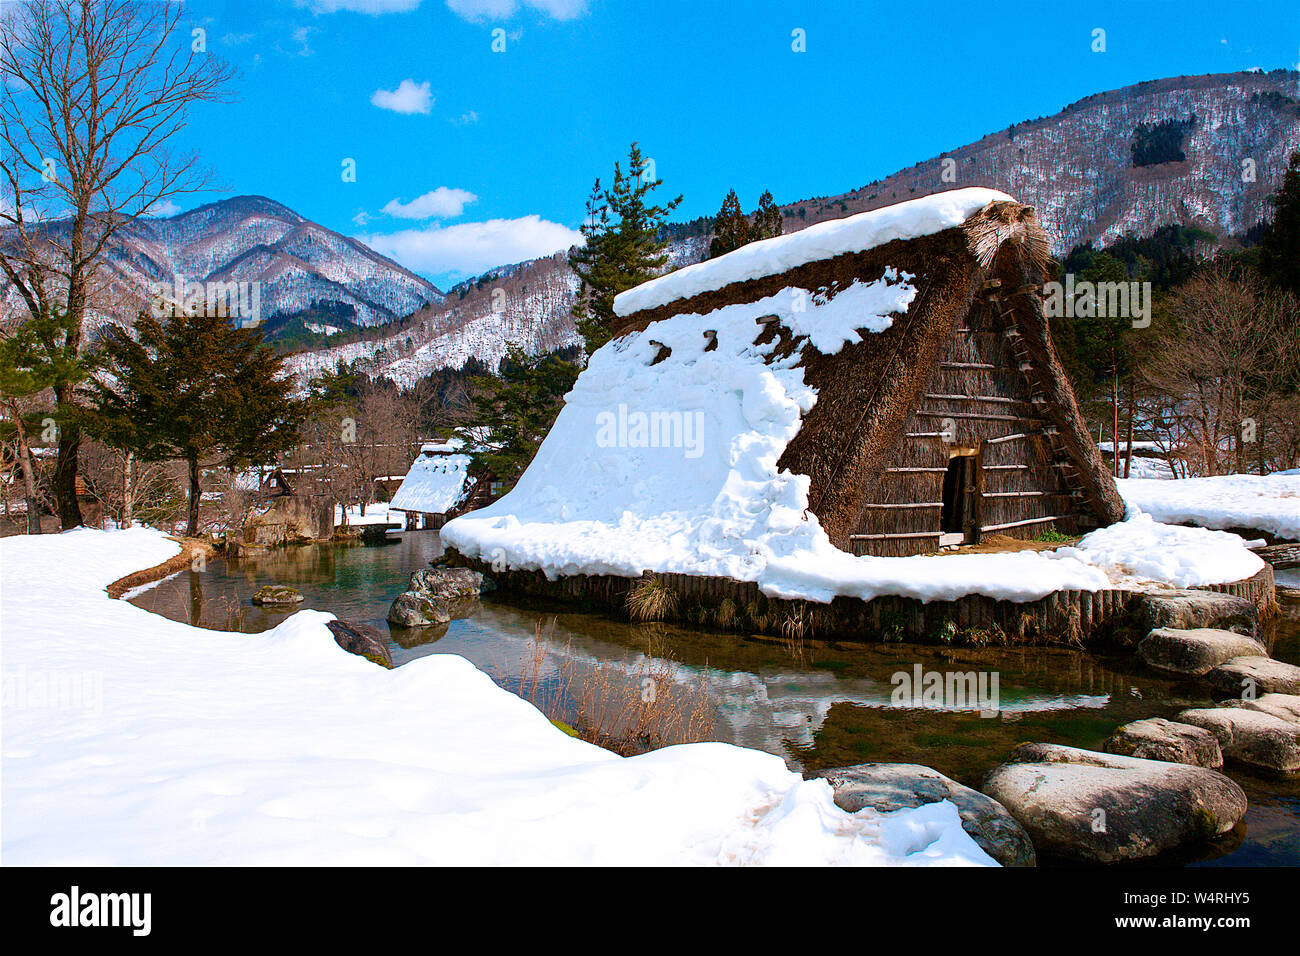 Wooden village shelter with straw roof surrounded by water with mountain on horizon in winter, Shirakawa village, Ono District Stock Photo